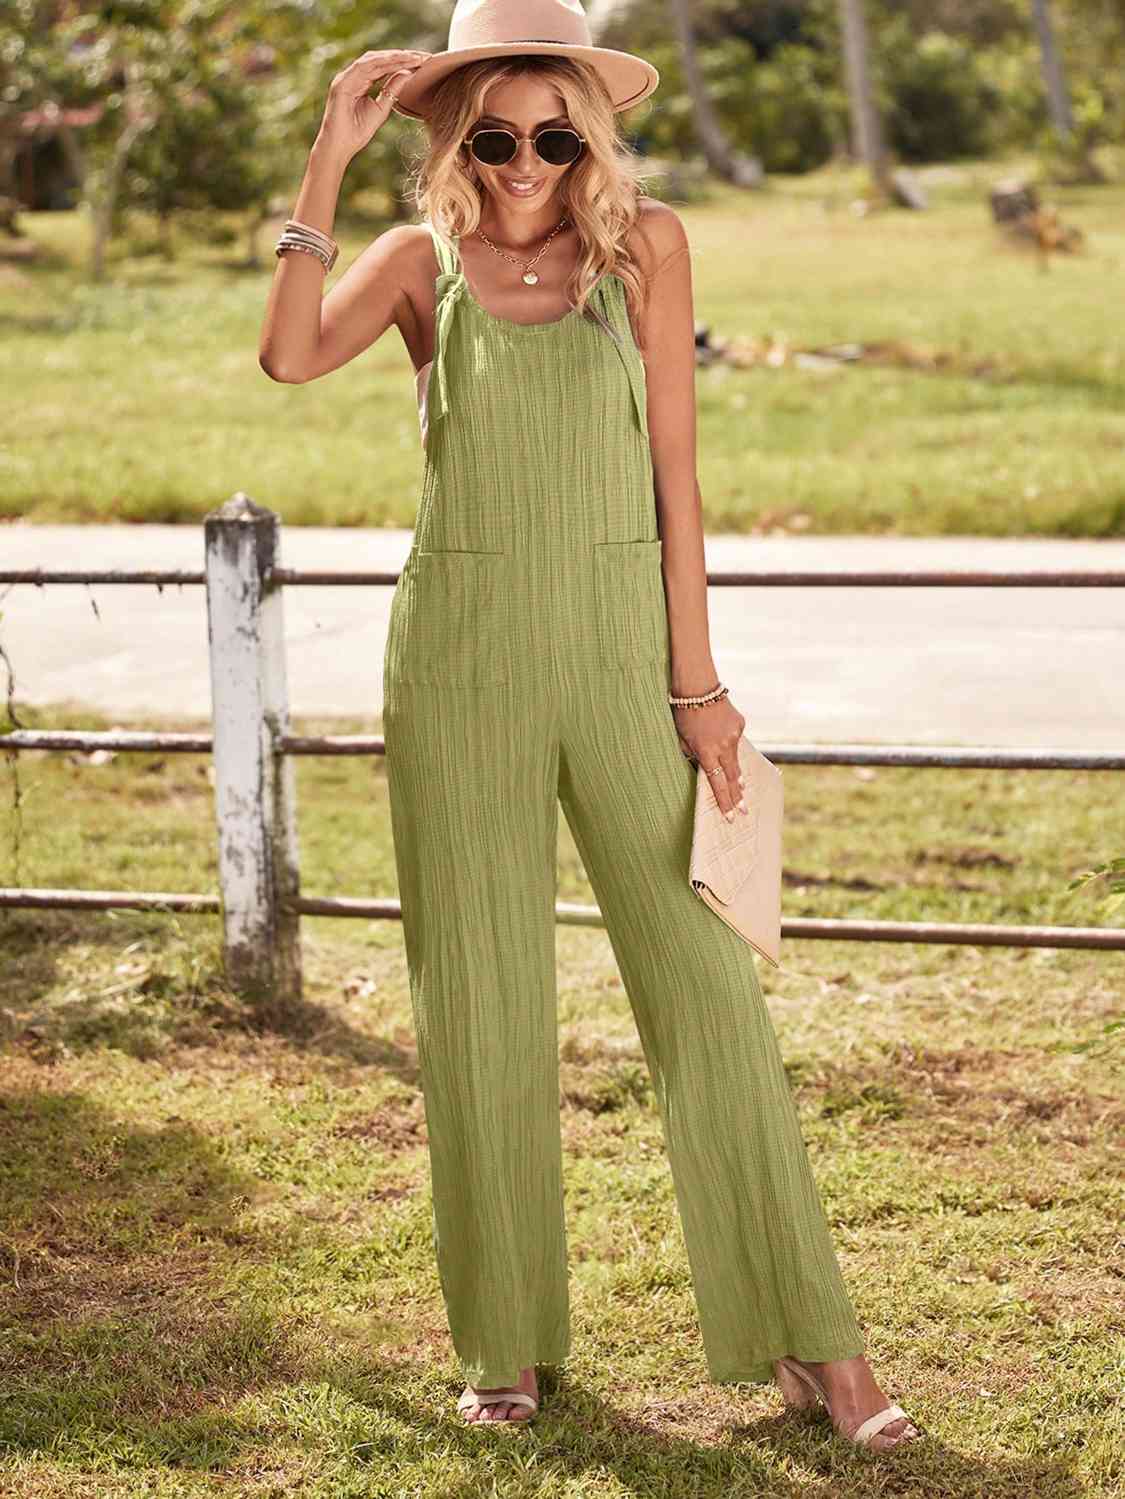 Round Neck Sleeveless Jumpsuit with Pockets Print on any thing USA/STOD clothes